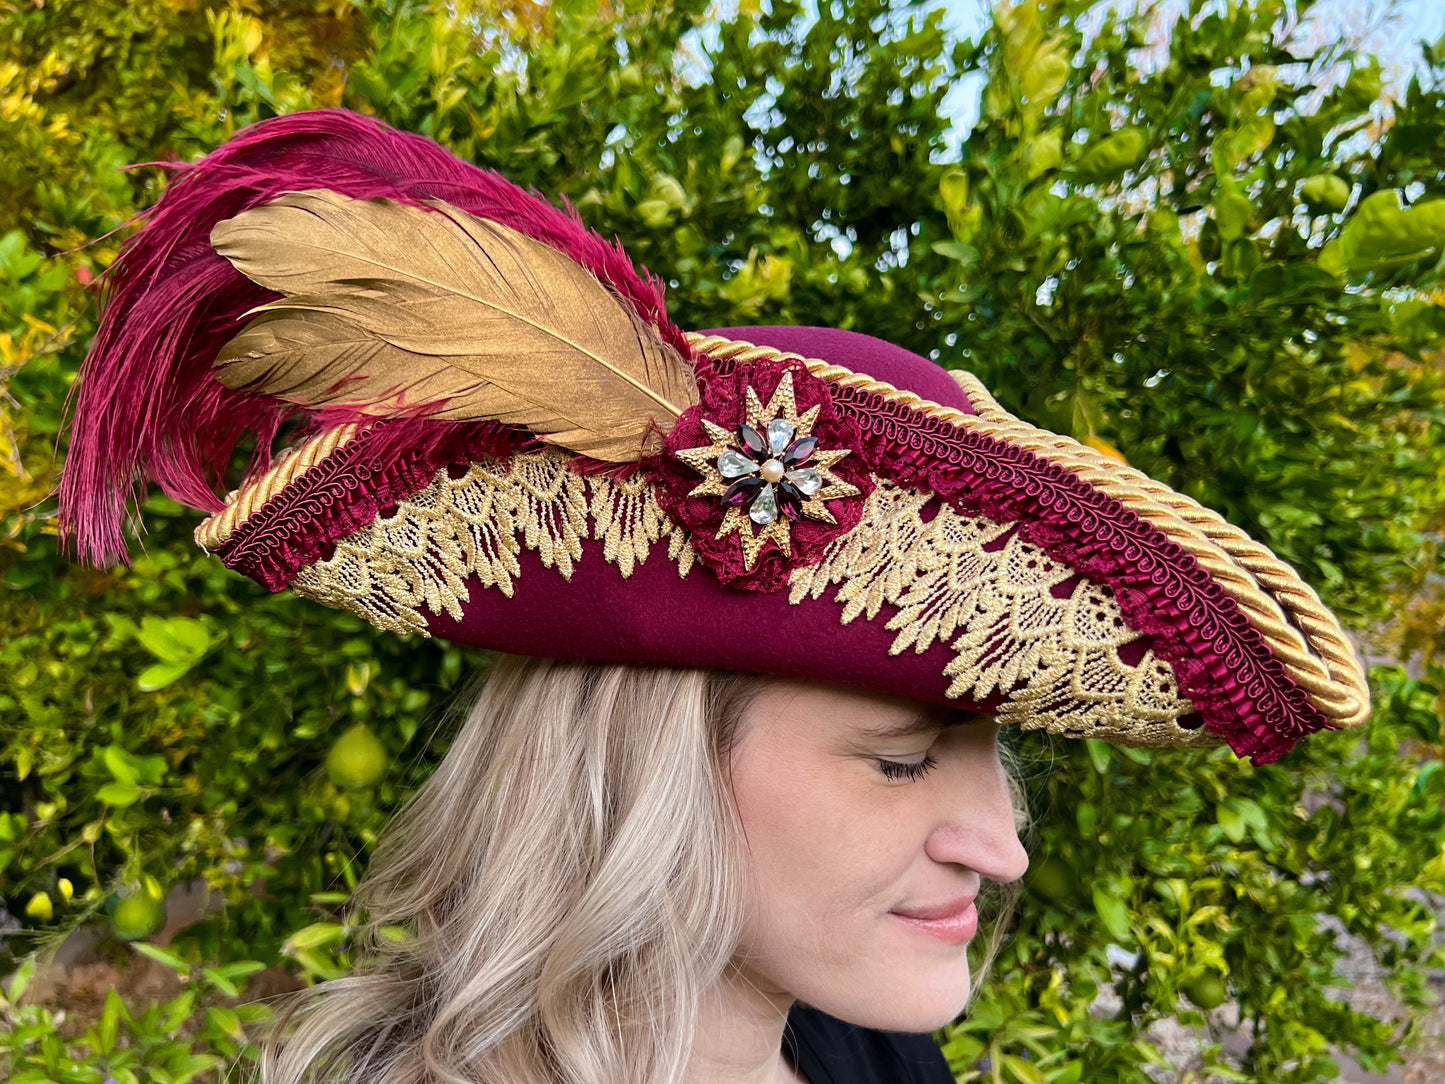 Tricorn Hat 22" Maroon Polyester Base with Gold Trim, Feathers, and Spiked Brooch